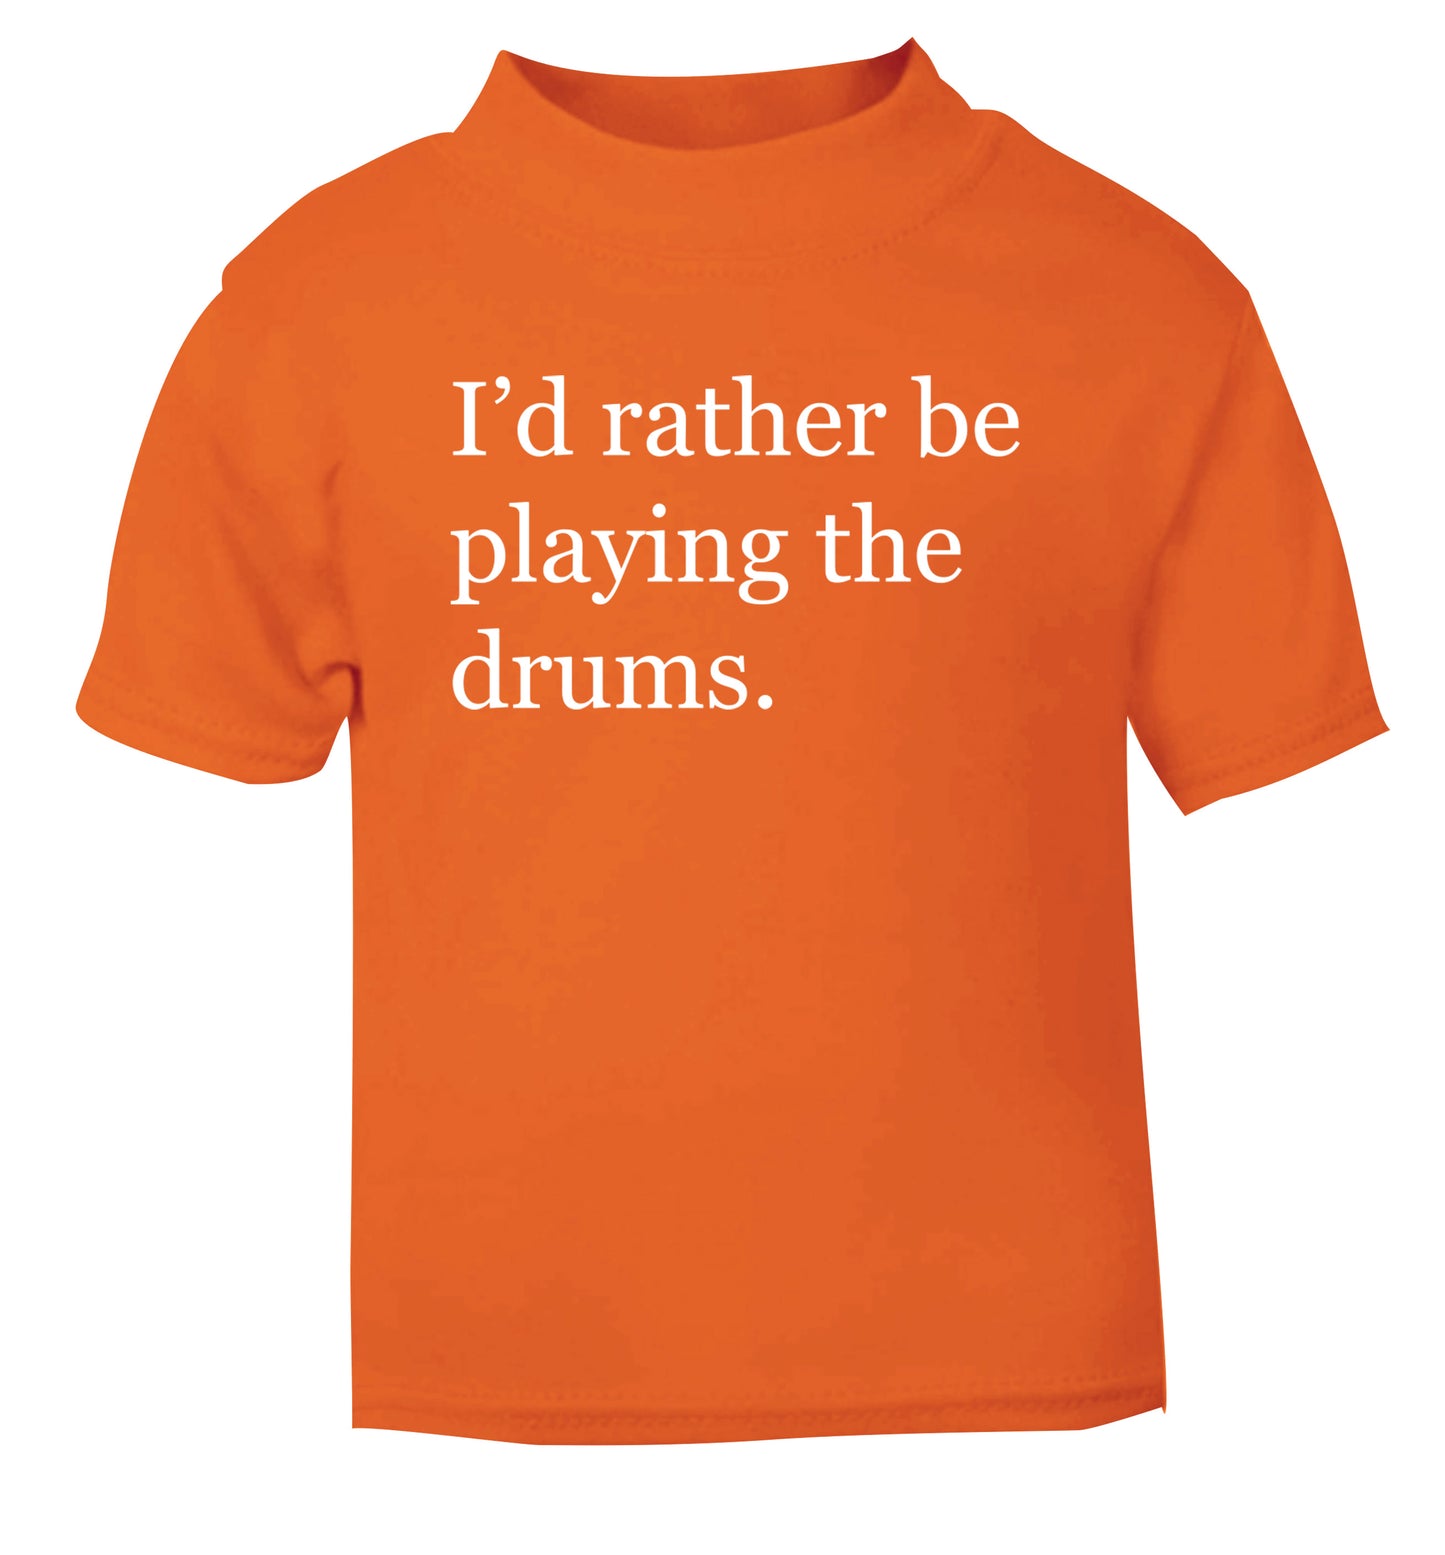 I'd rather be playing the drums orange Baby Toddler Tshirt 2 Years